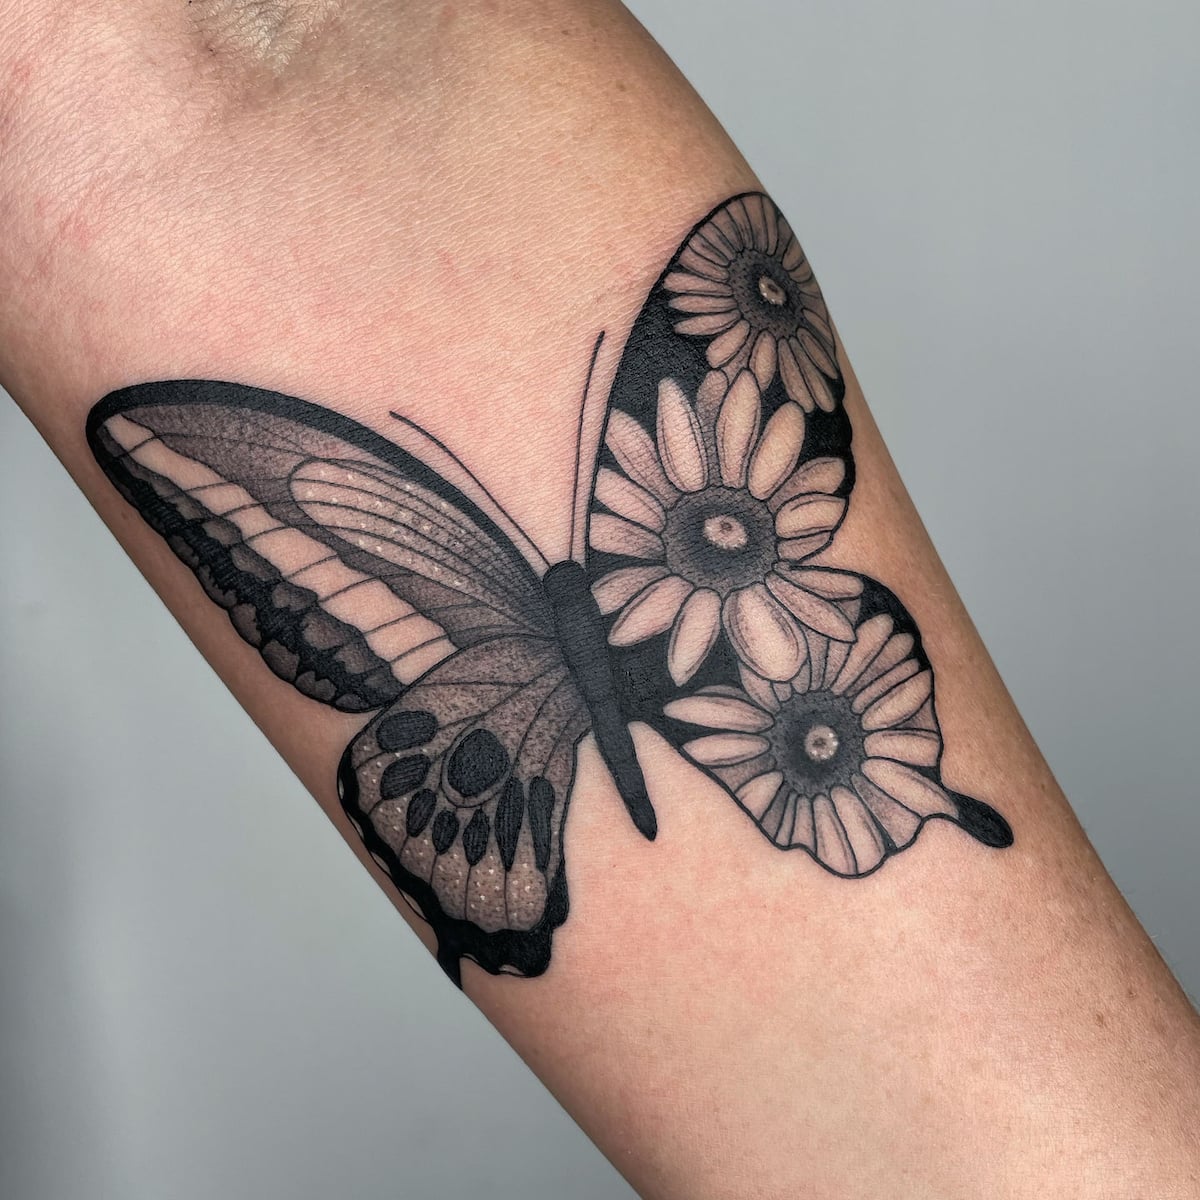 Daisy Tattoo Designs And Daisy Tattoo MeaningsDaisy Tattoo Ideas And Tattoo  Pictures  HubPages